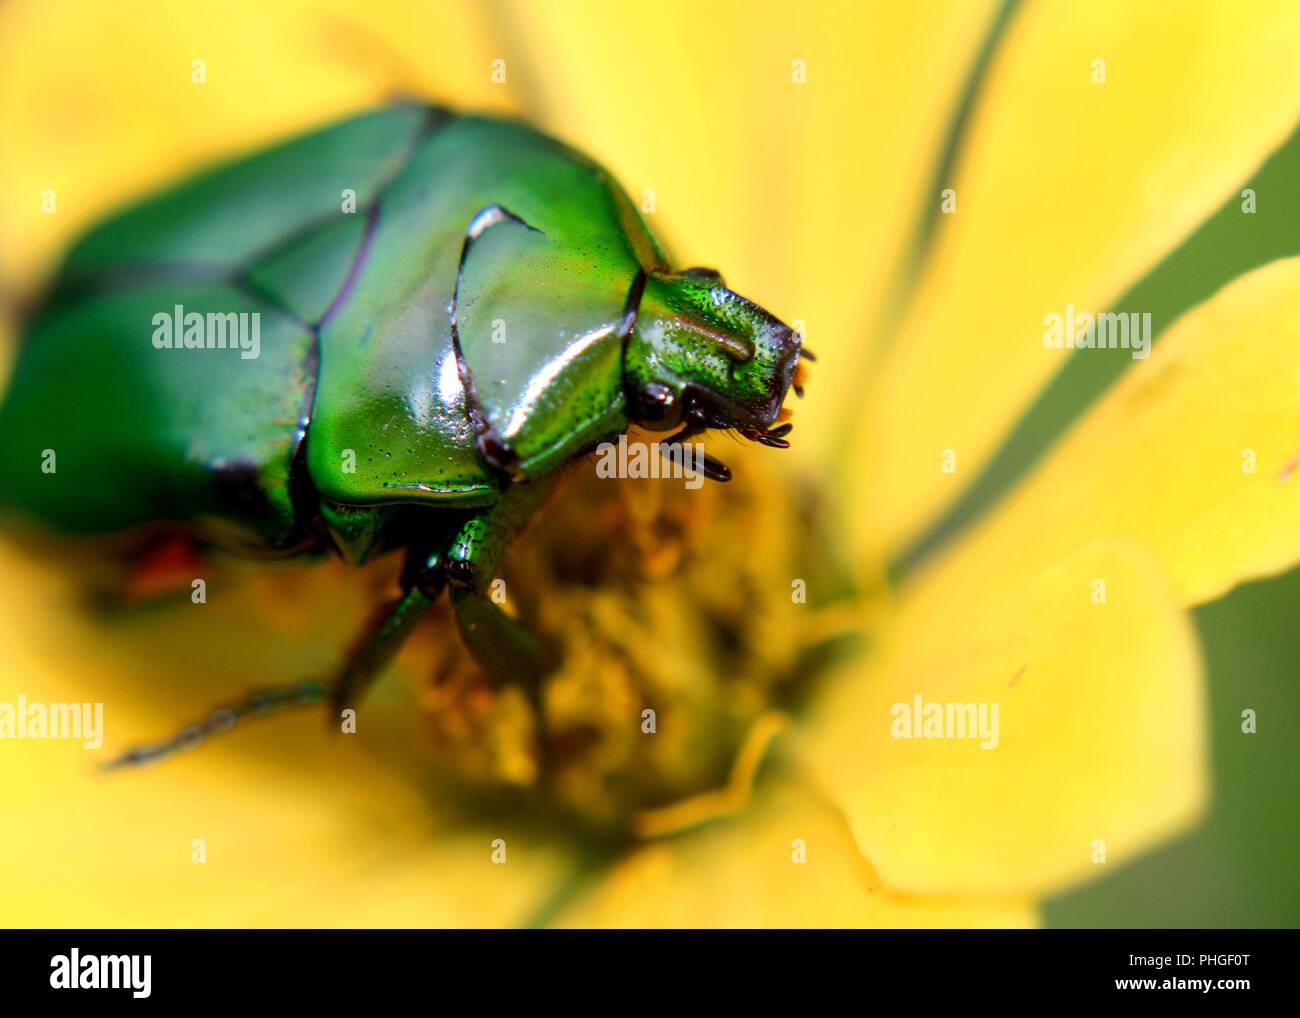 close up of a luminous green color insect, dung beetle, sacred scarab found in a garden in sri lanka Stock Photo